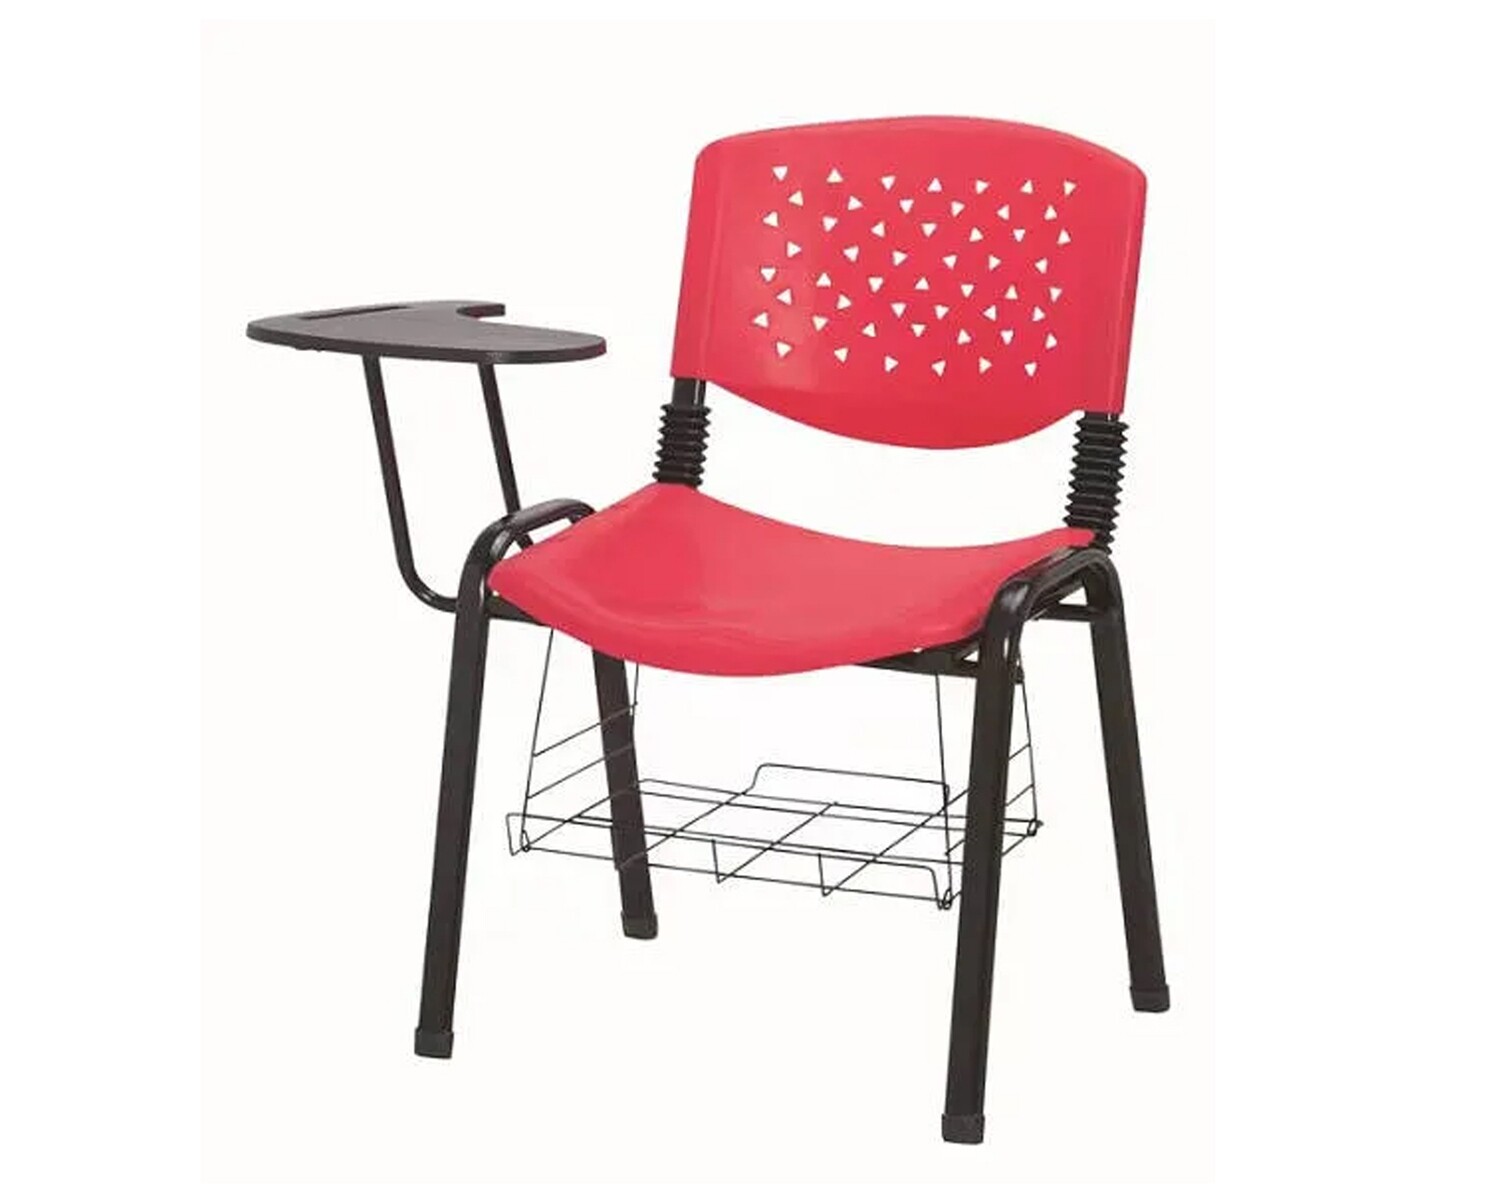 Ofix Deluxe-31W School Chair (Red, Blue)